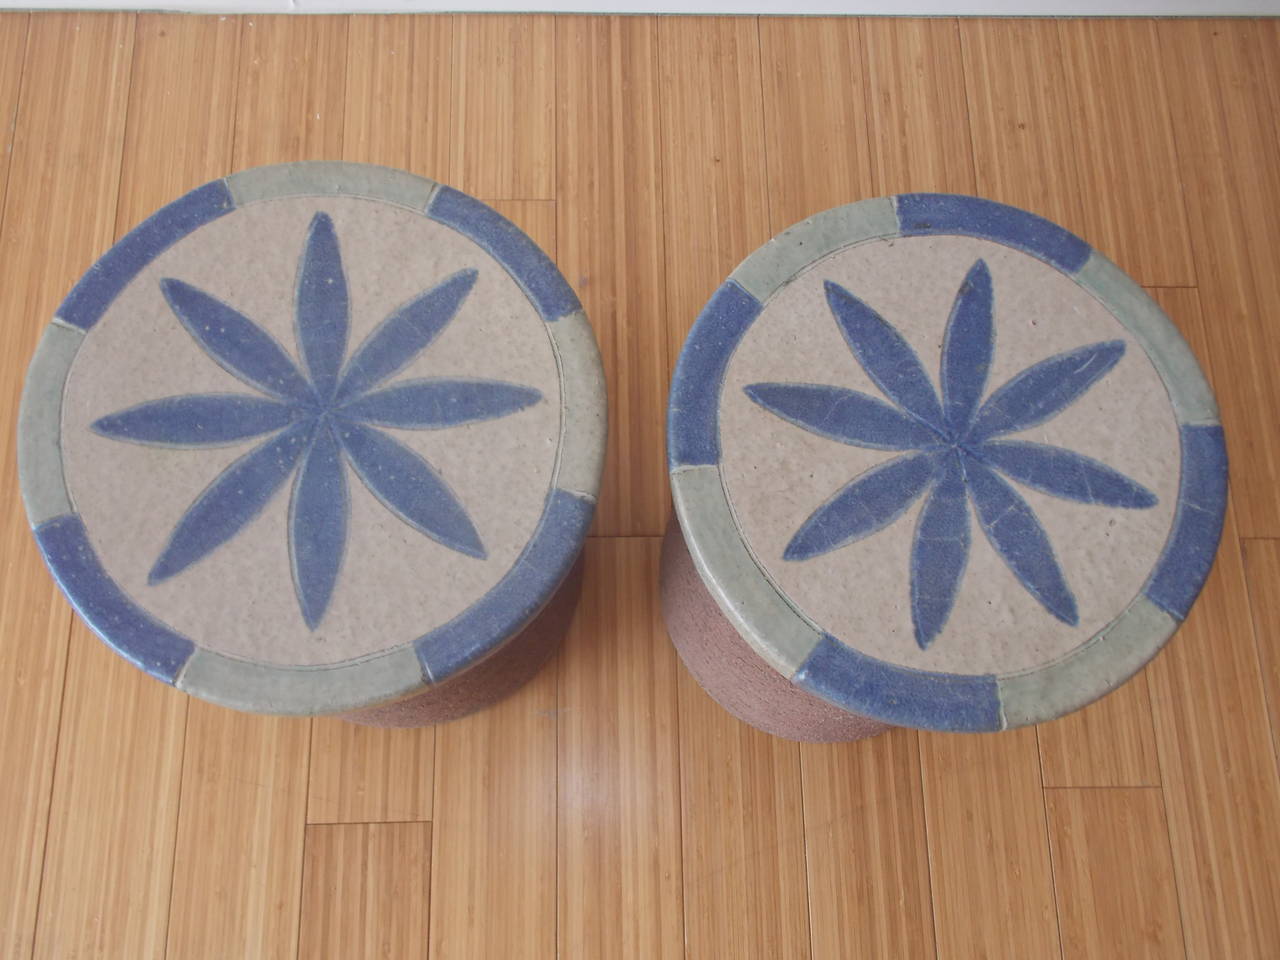 A nice pair of ceramic designs, with glazed star pattern.
These can be used as garden stools or tables.